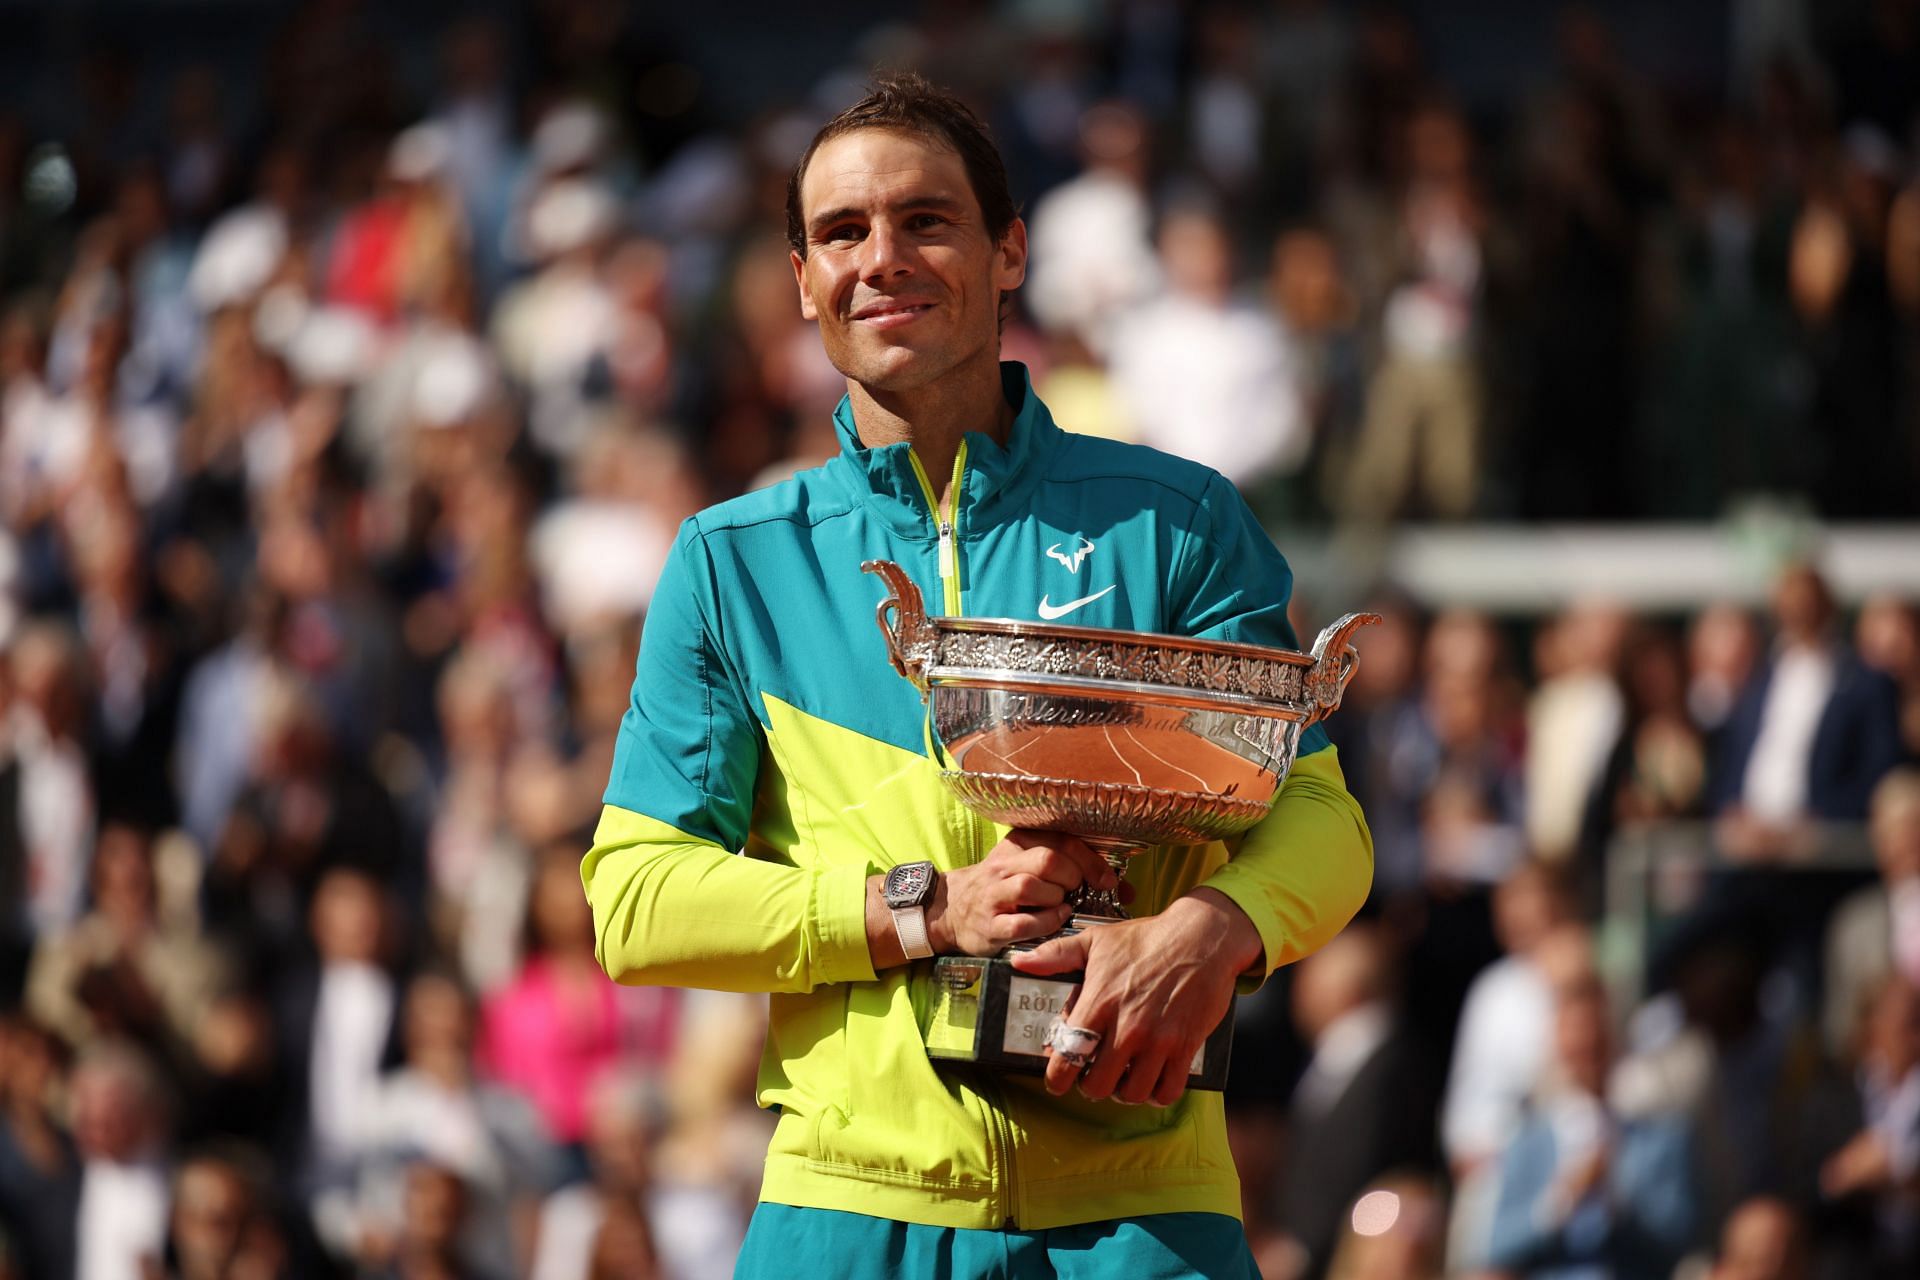 Despite winning two Slams in 2022, Rafael Nadal is only ranked World No. 4